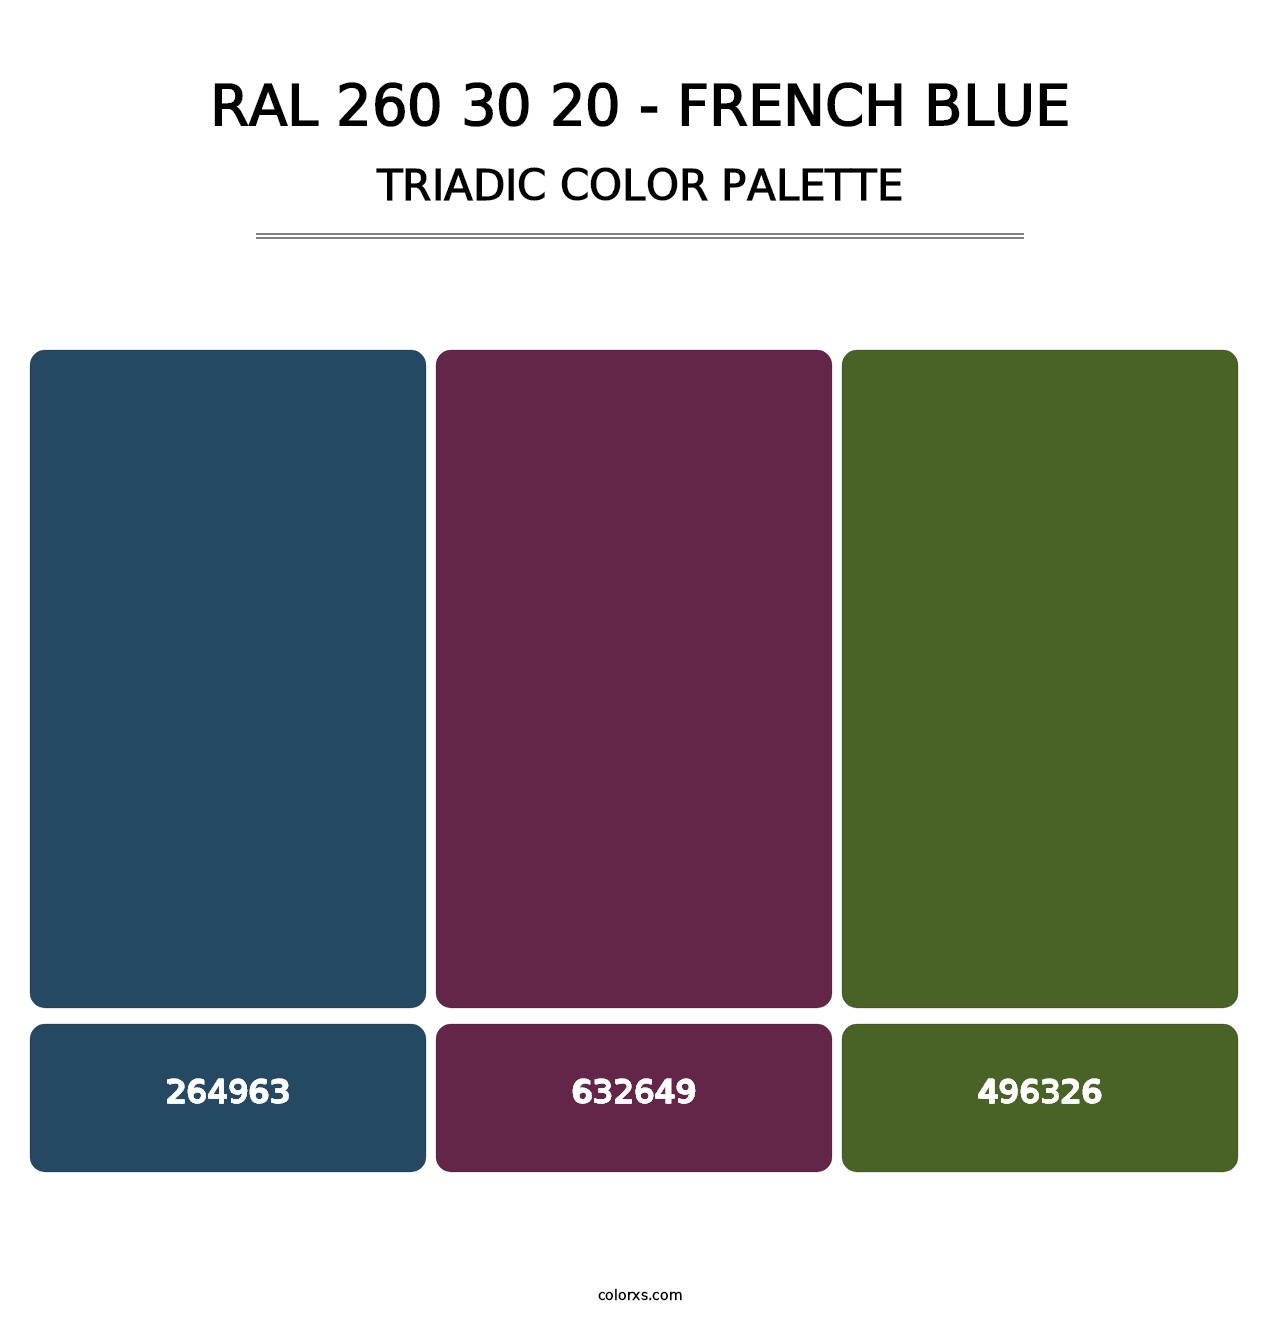 RAL 260 30 20 - French Blue - Triadic Color Palette